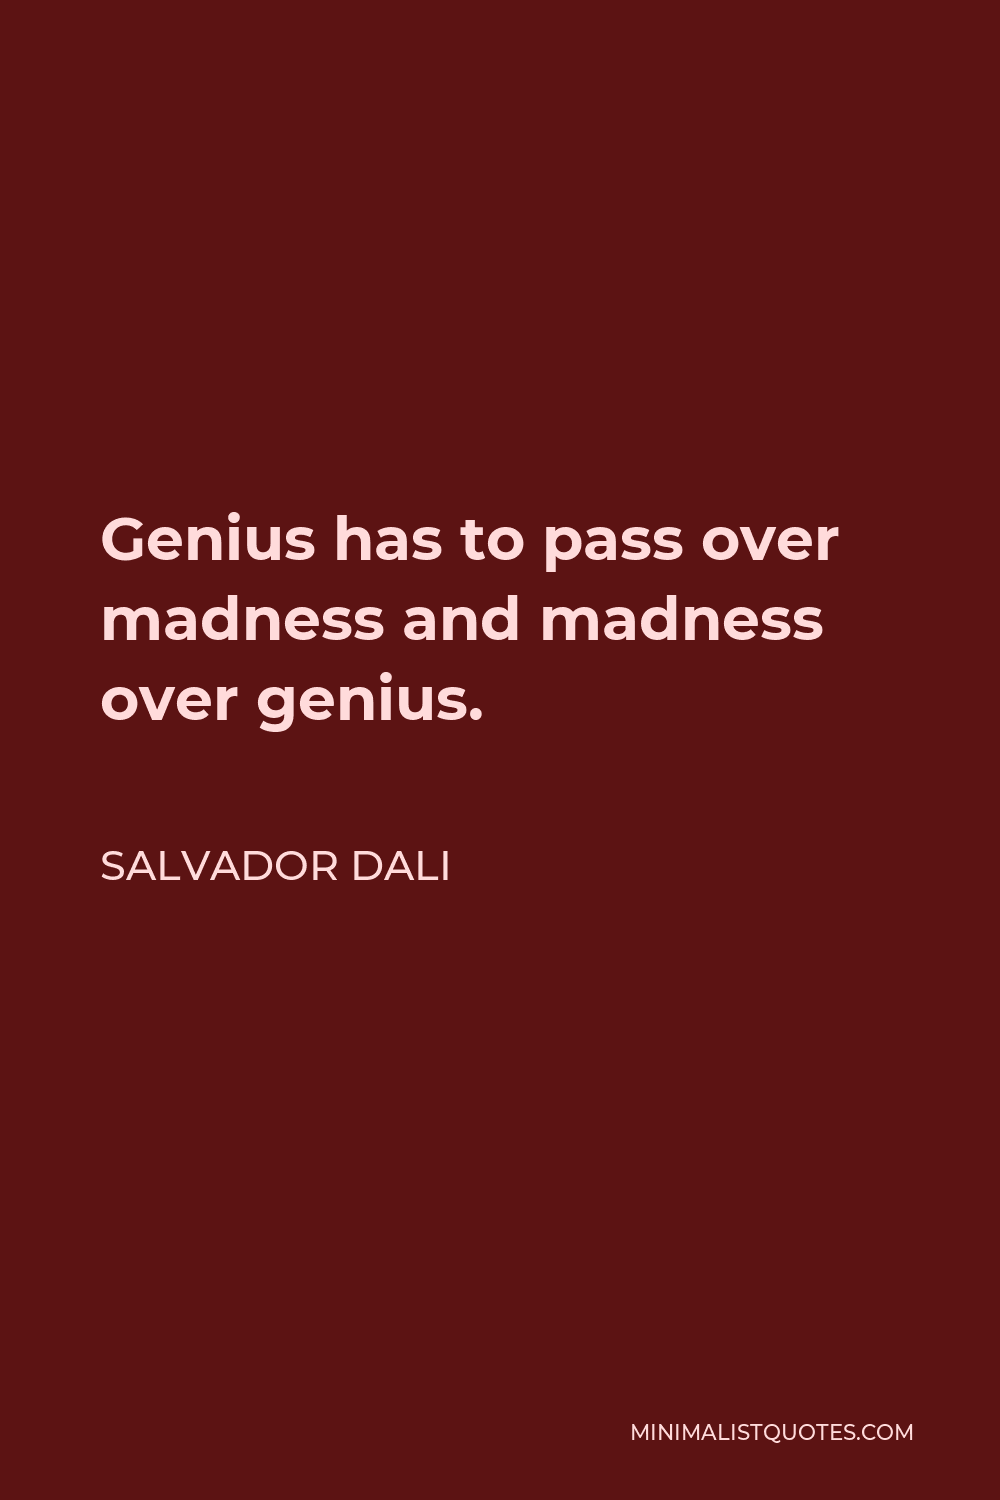 Salvador Dali Quote - Genius has to pass over madness and madness over genius.